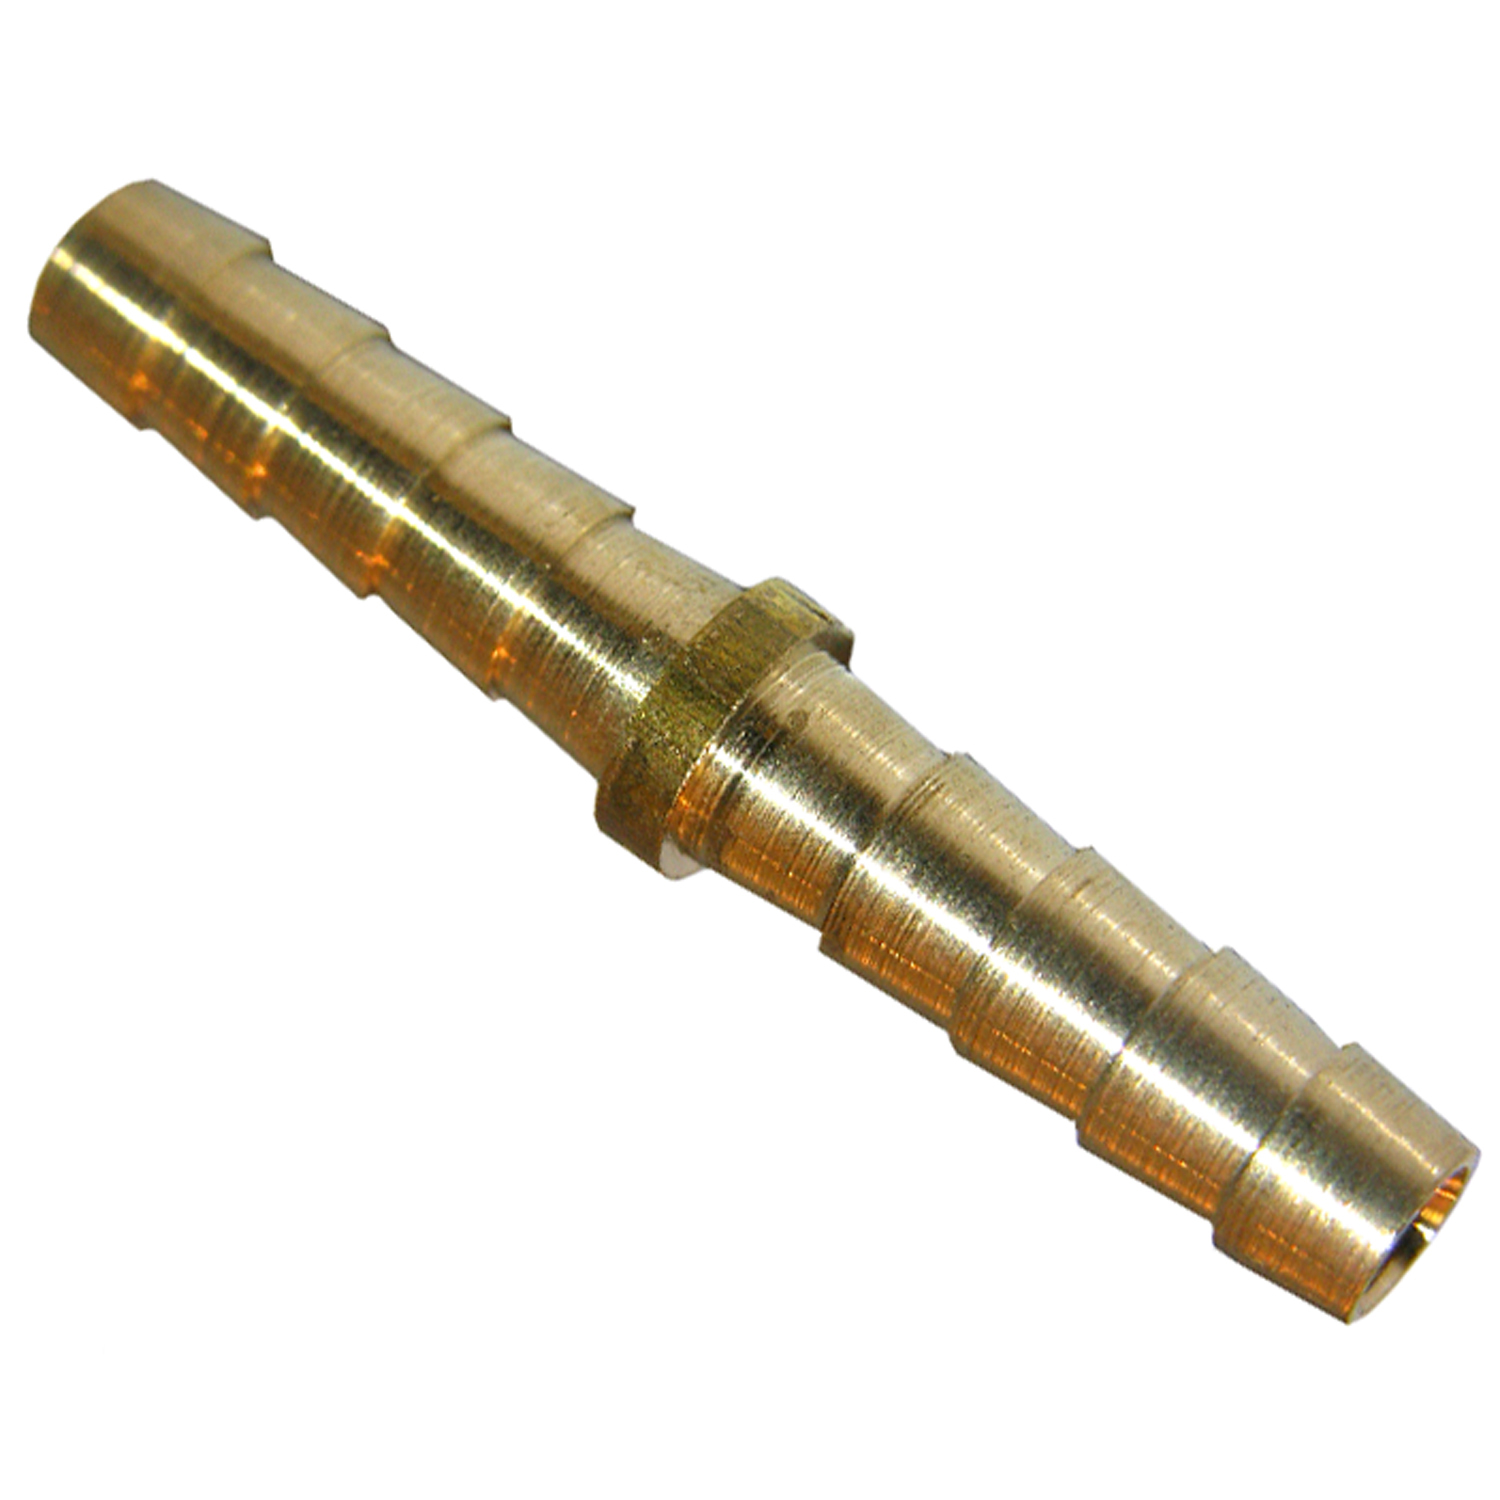 Lasco 17-7511 Coupling, 1/4 in, Barb, Brass